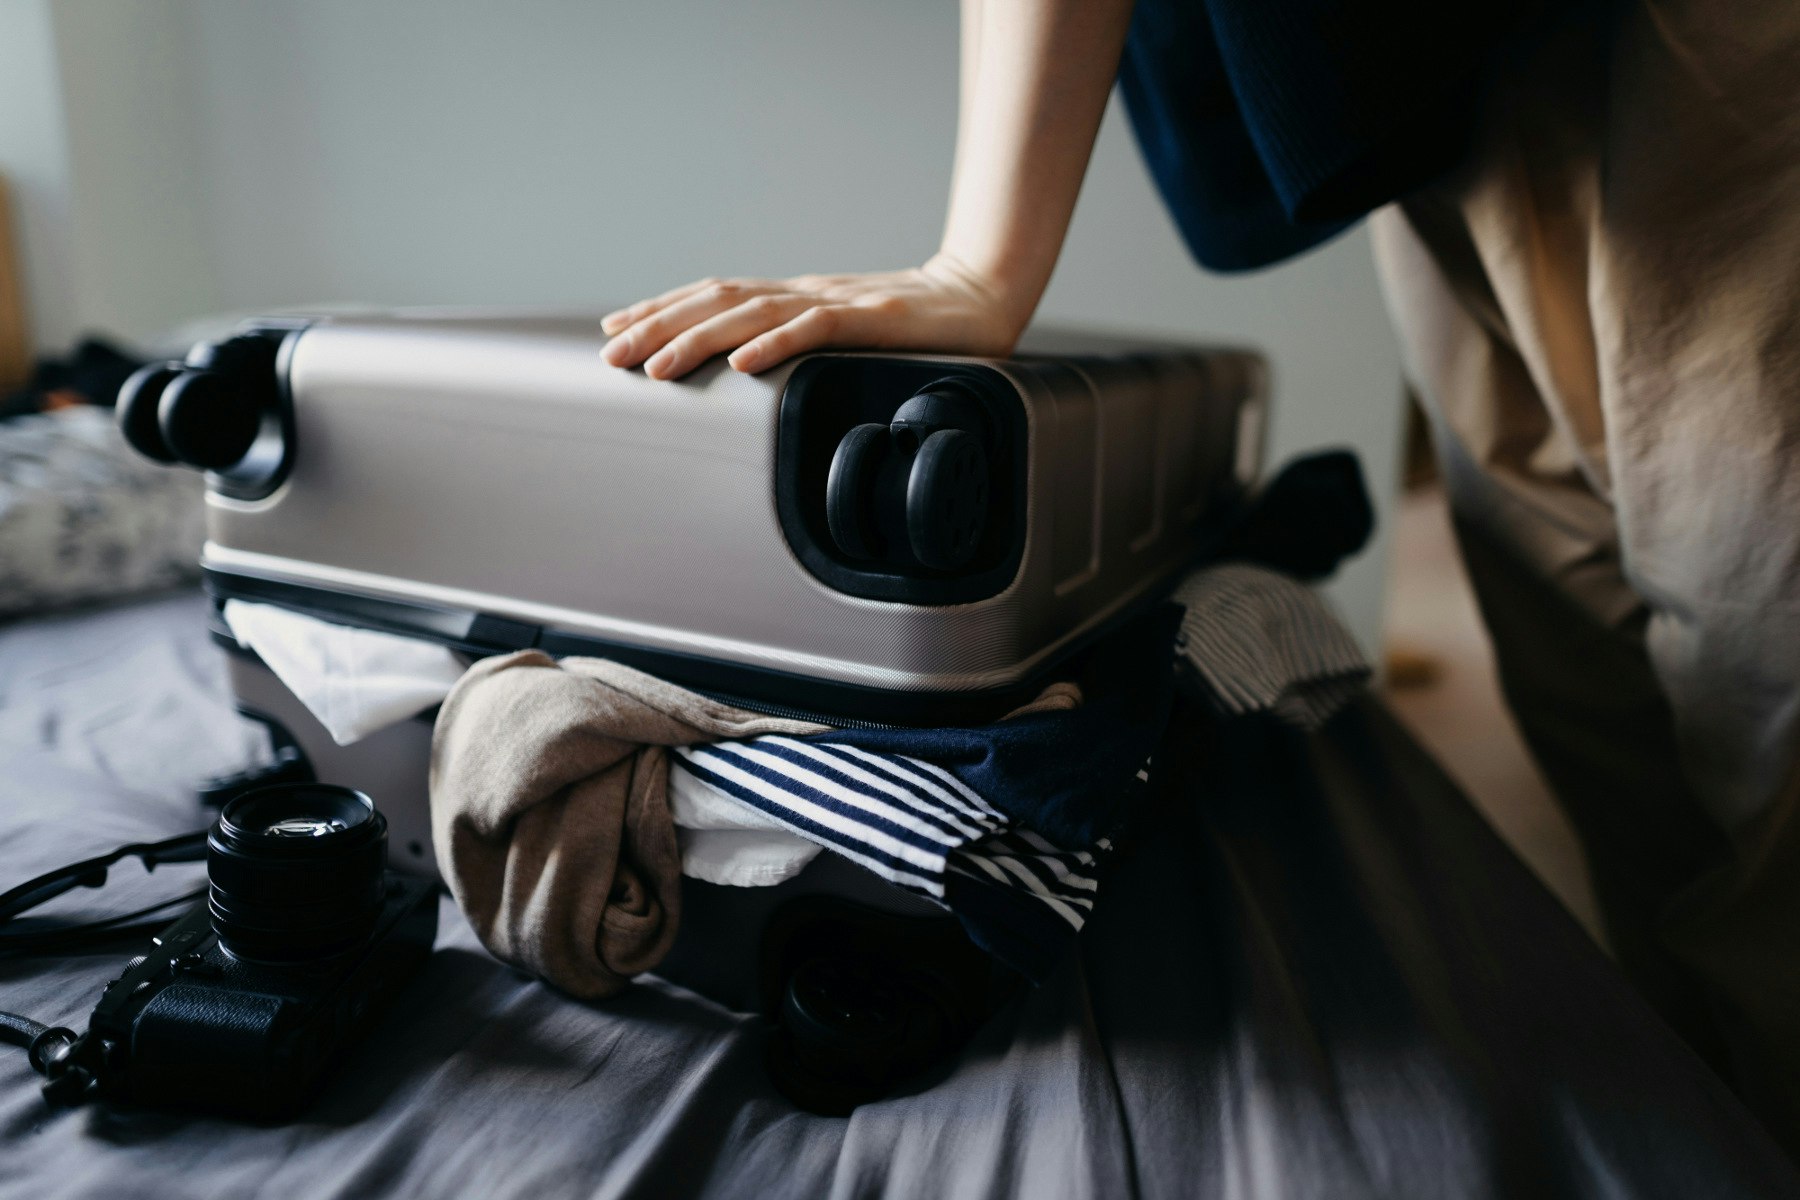 Woman struggling with overflowing suitcase on the bed at home